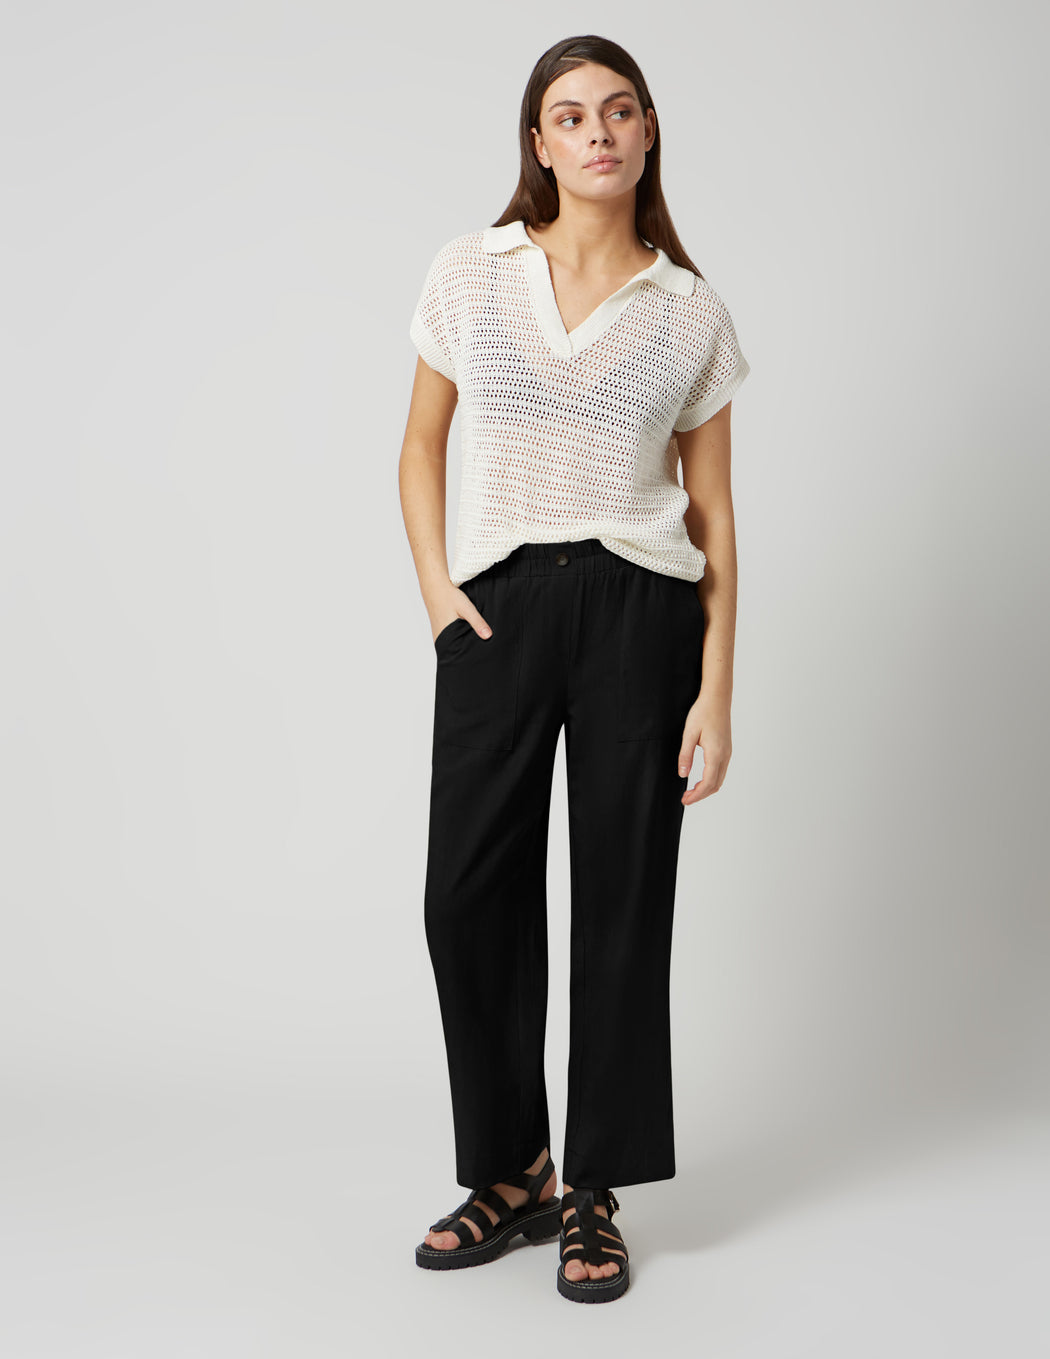 NELSON linen pants to travel in comfort - travel wear